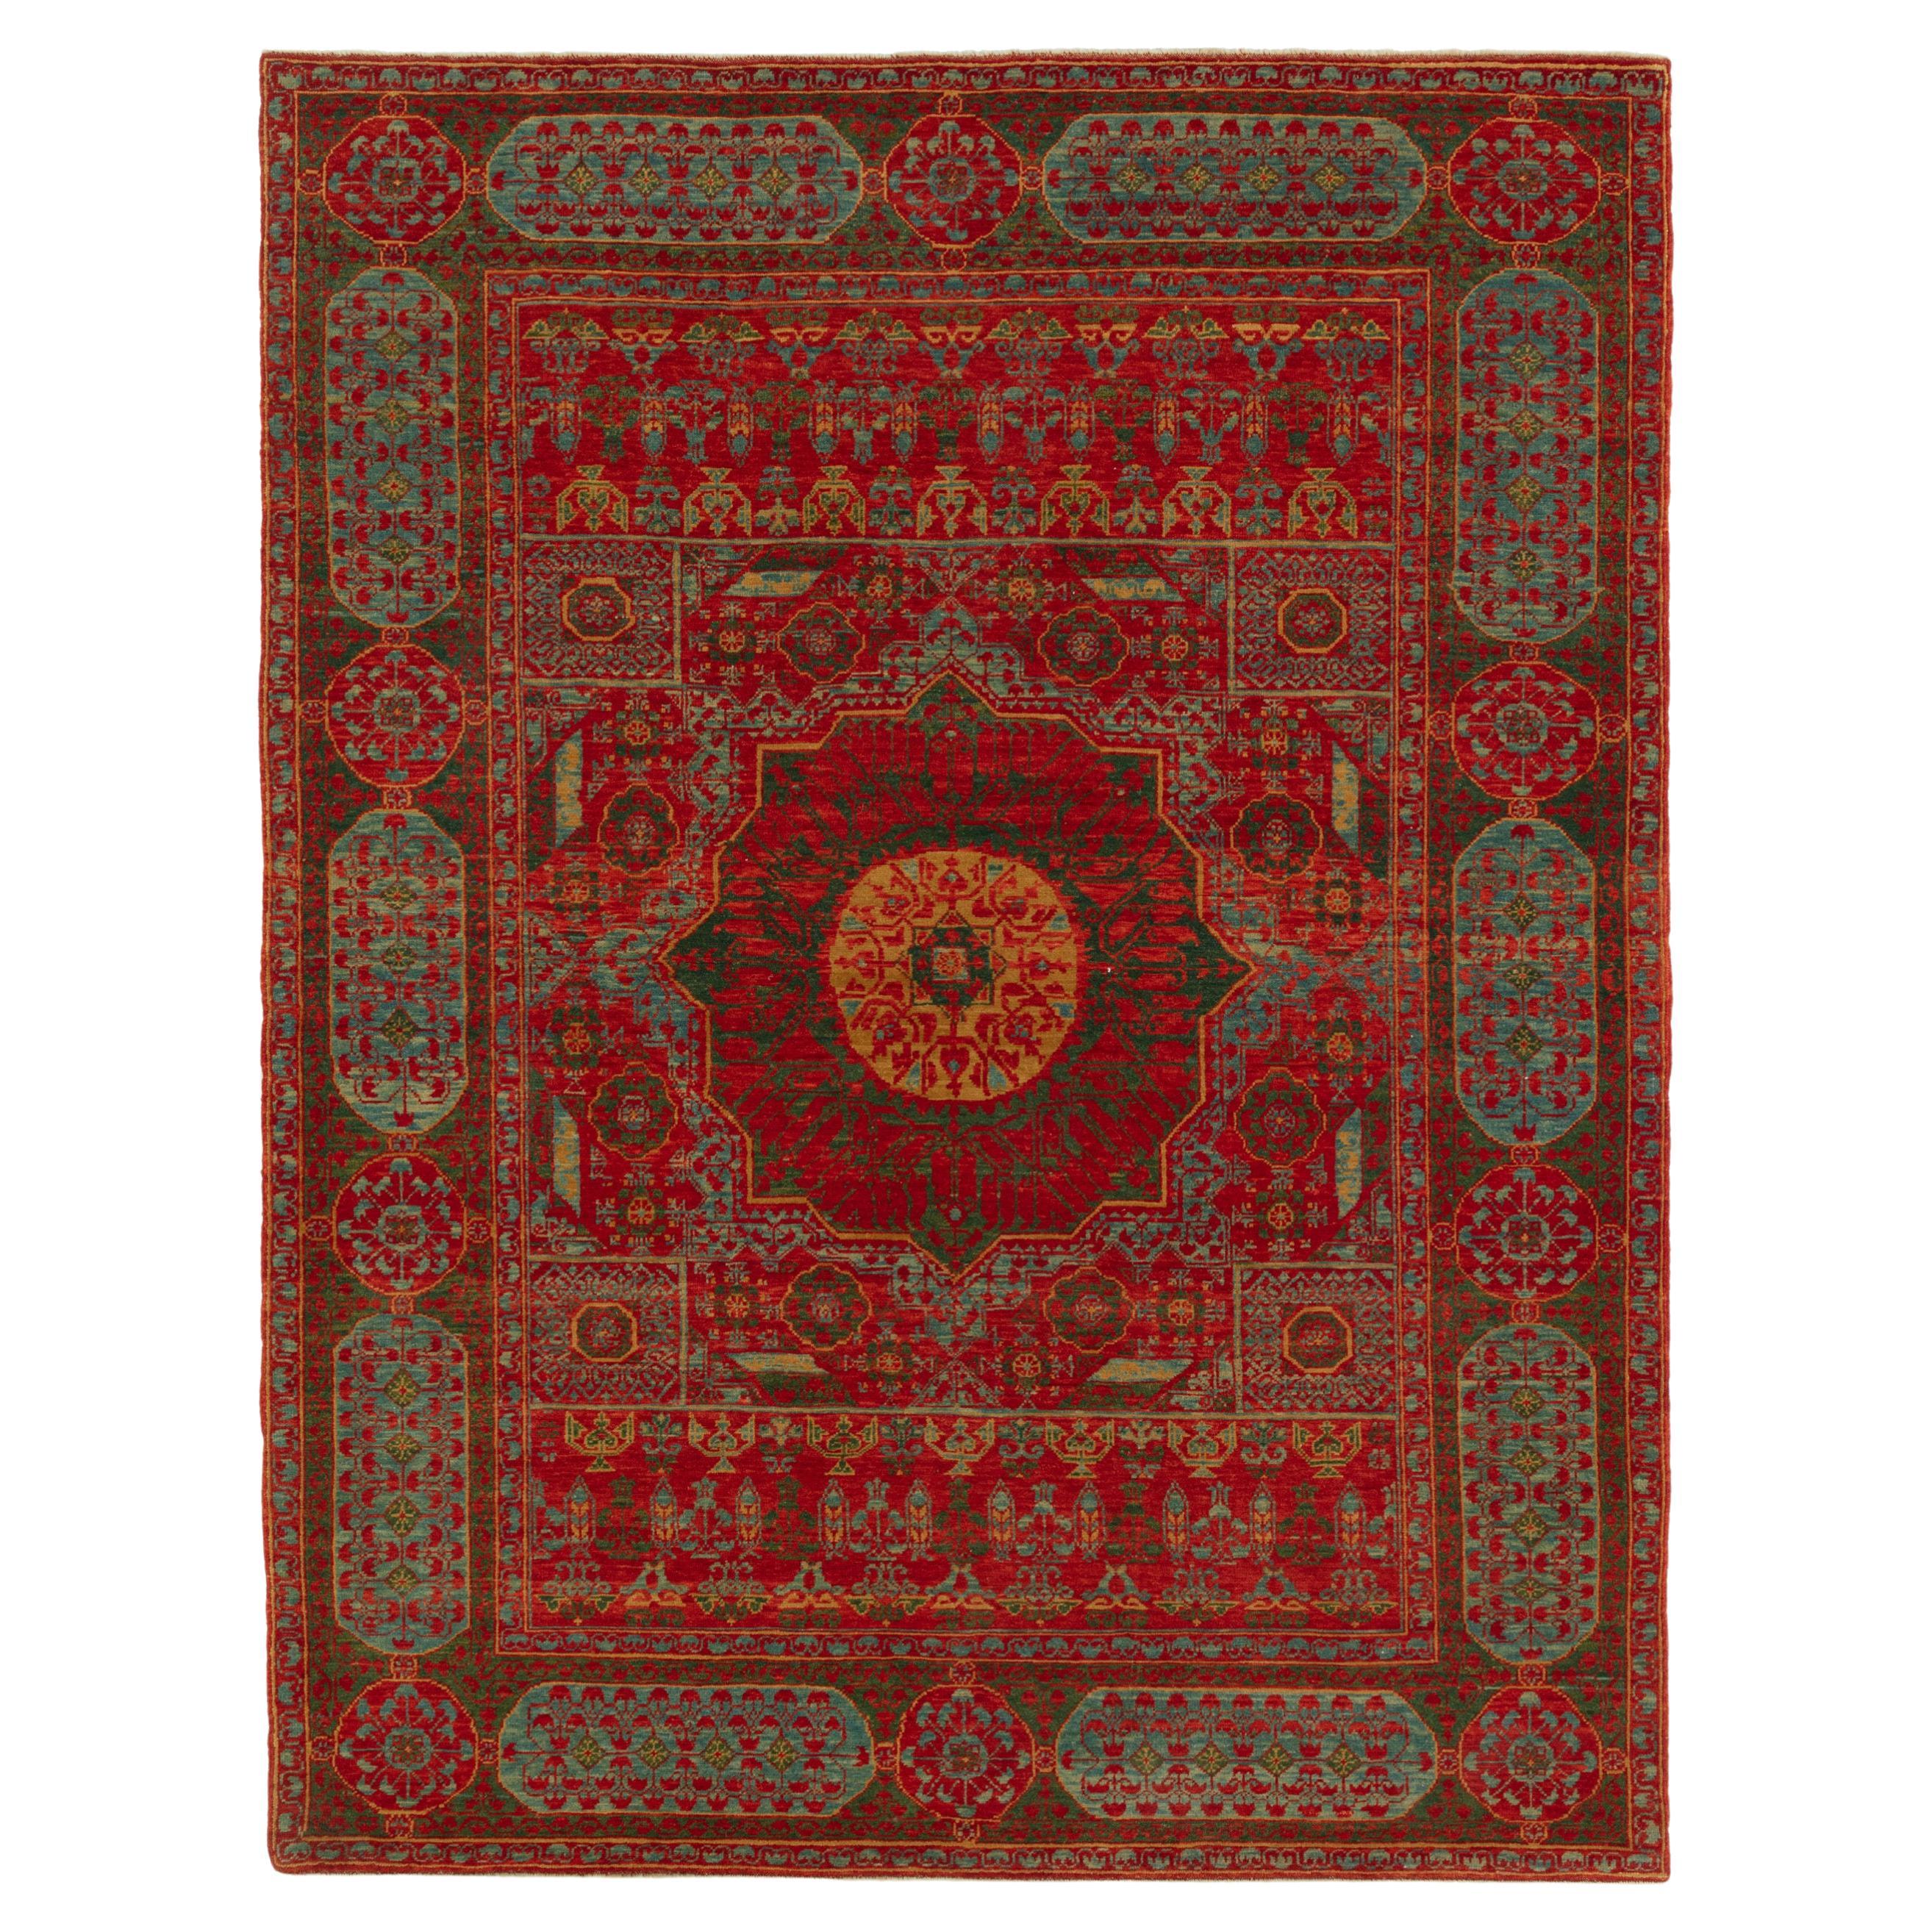 Ararat Rugs Mamluk Rug with Central Star Cairene Revival Carpet Natural Dyed For Sale